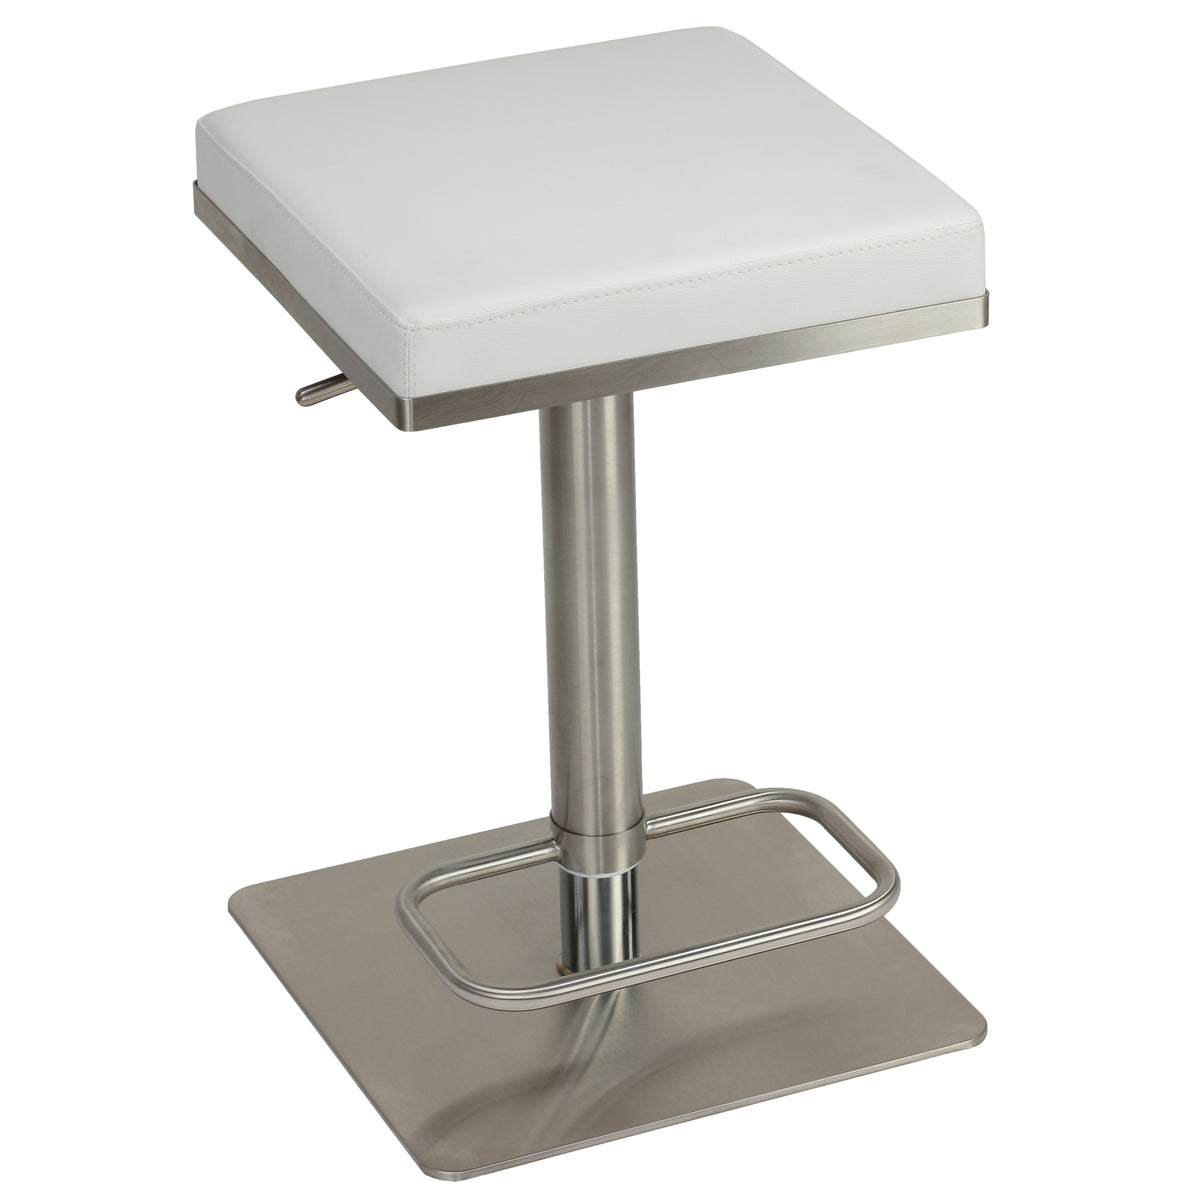 Cortesi Home Atlas Adjustable Barstool in Brushed Stainless Steel with Heavy Solid Base, White